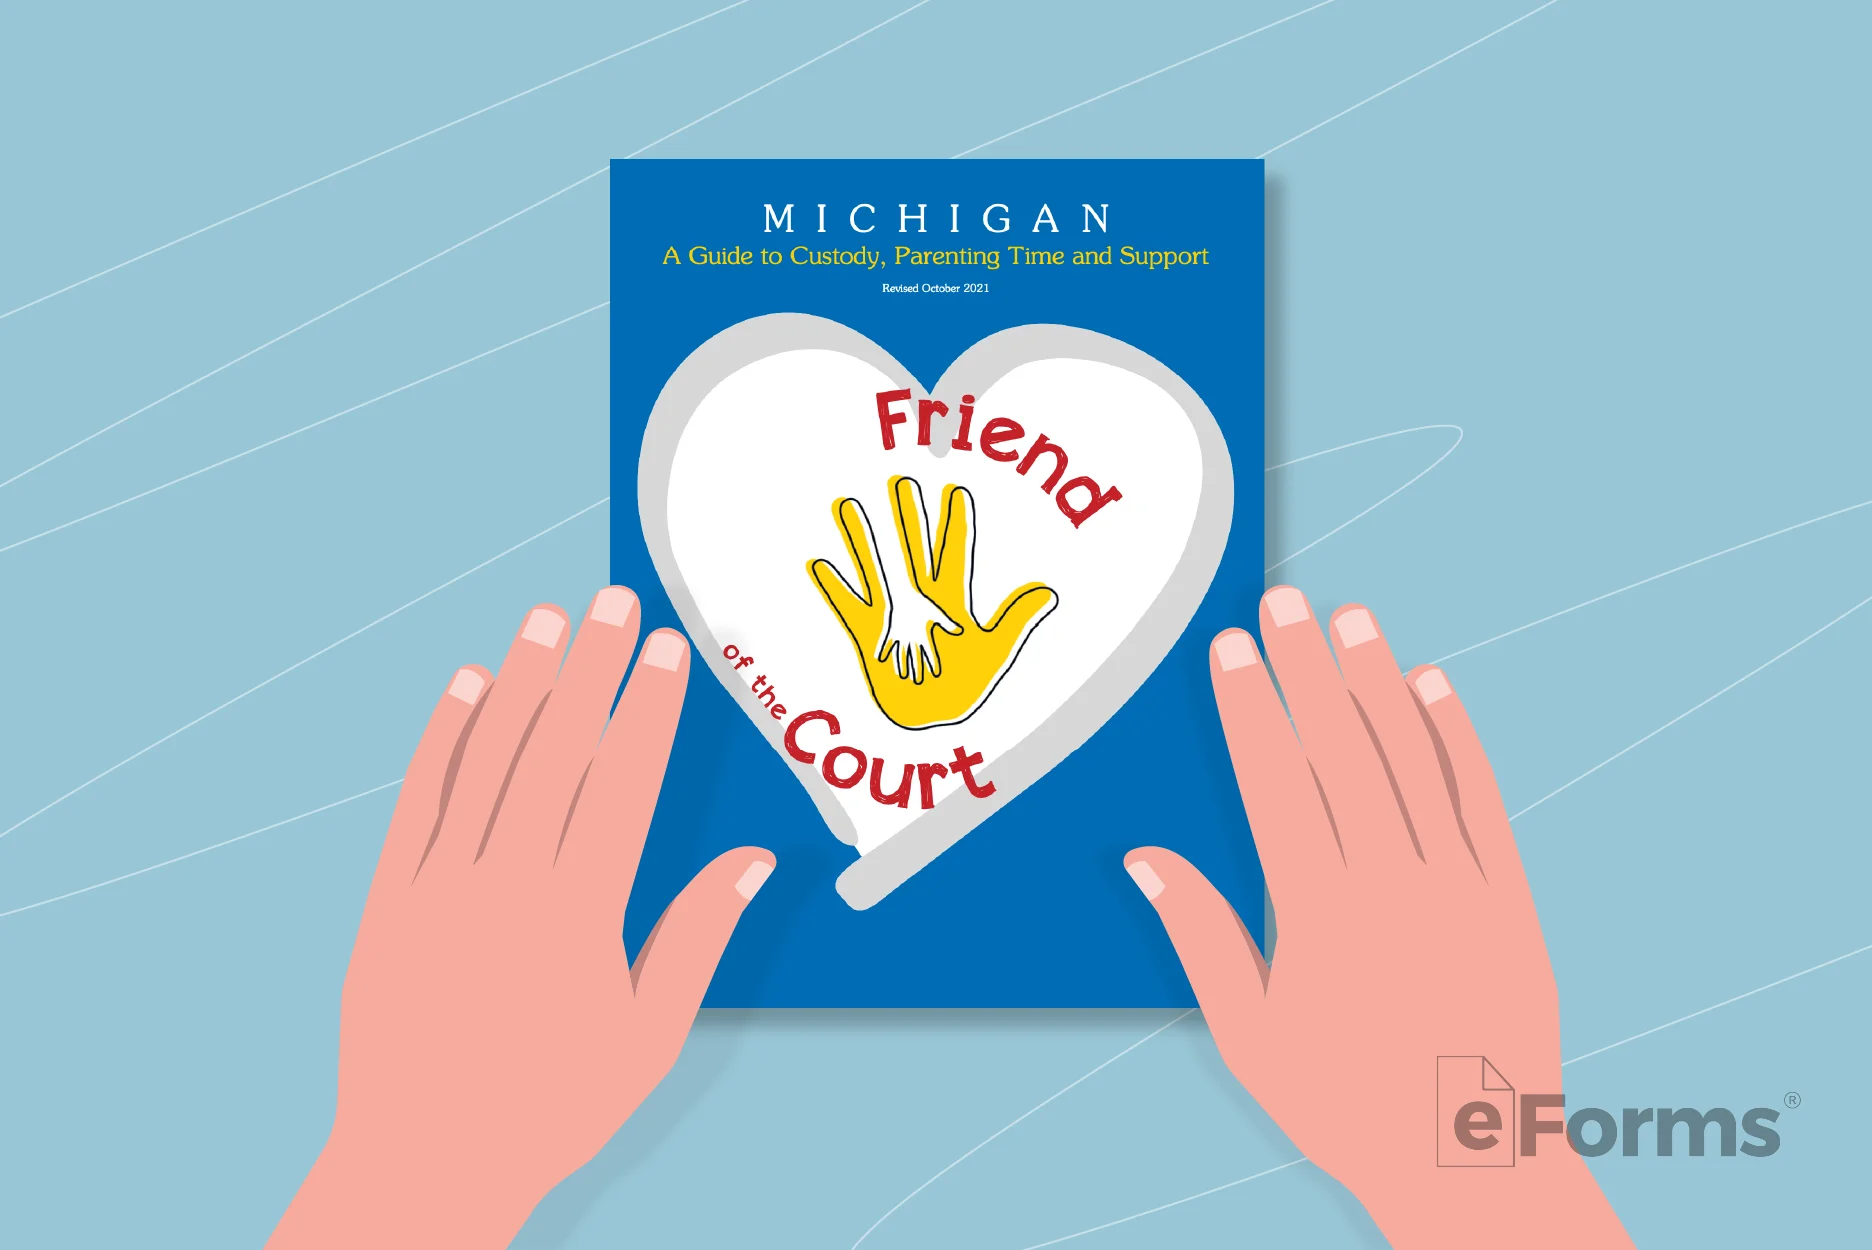 Hands holding "Michigan Guide to Custody, Parenting Time and Support Handbook" book.